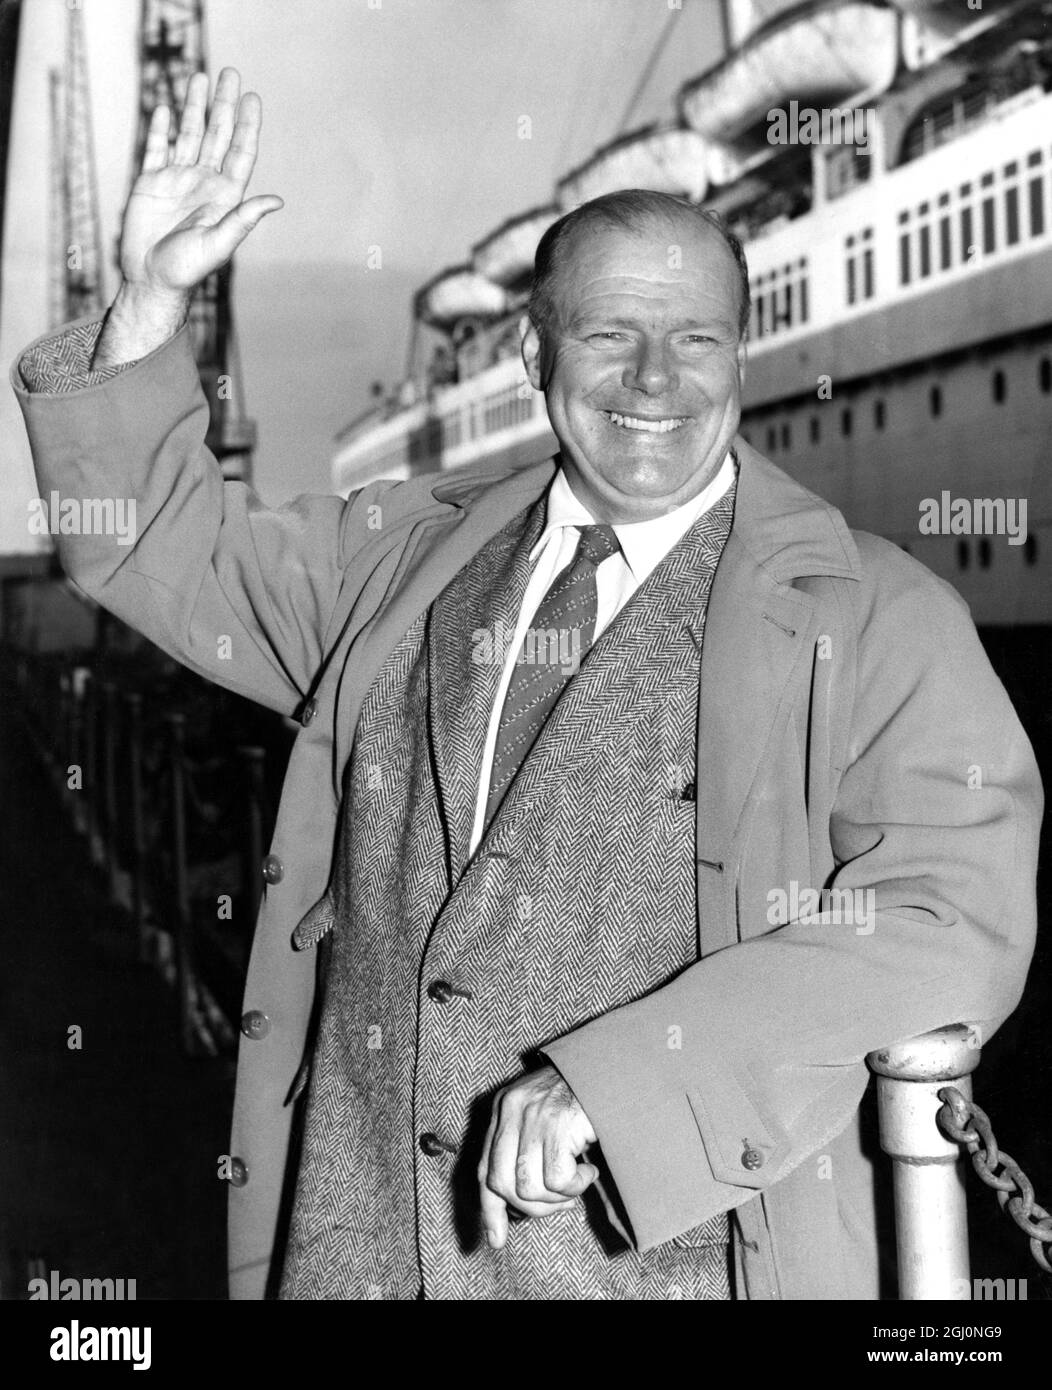 Commander Alan Villiers , the Australian born sailor - author who captained the Mayflower II , replica of the Pilgrim Fathers' ship , on her voyage from Britain to the United States , is pictured at Southampton , England , on his arrival from New York in the Cunard liner Queen Mary . 27 August 1957 Stock Photo